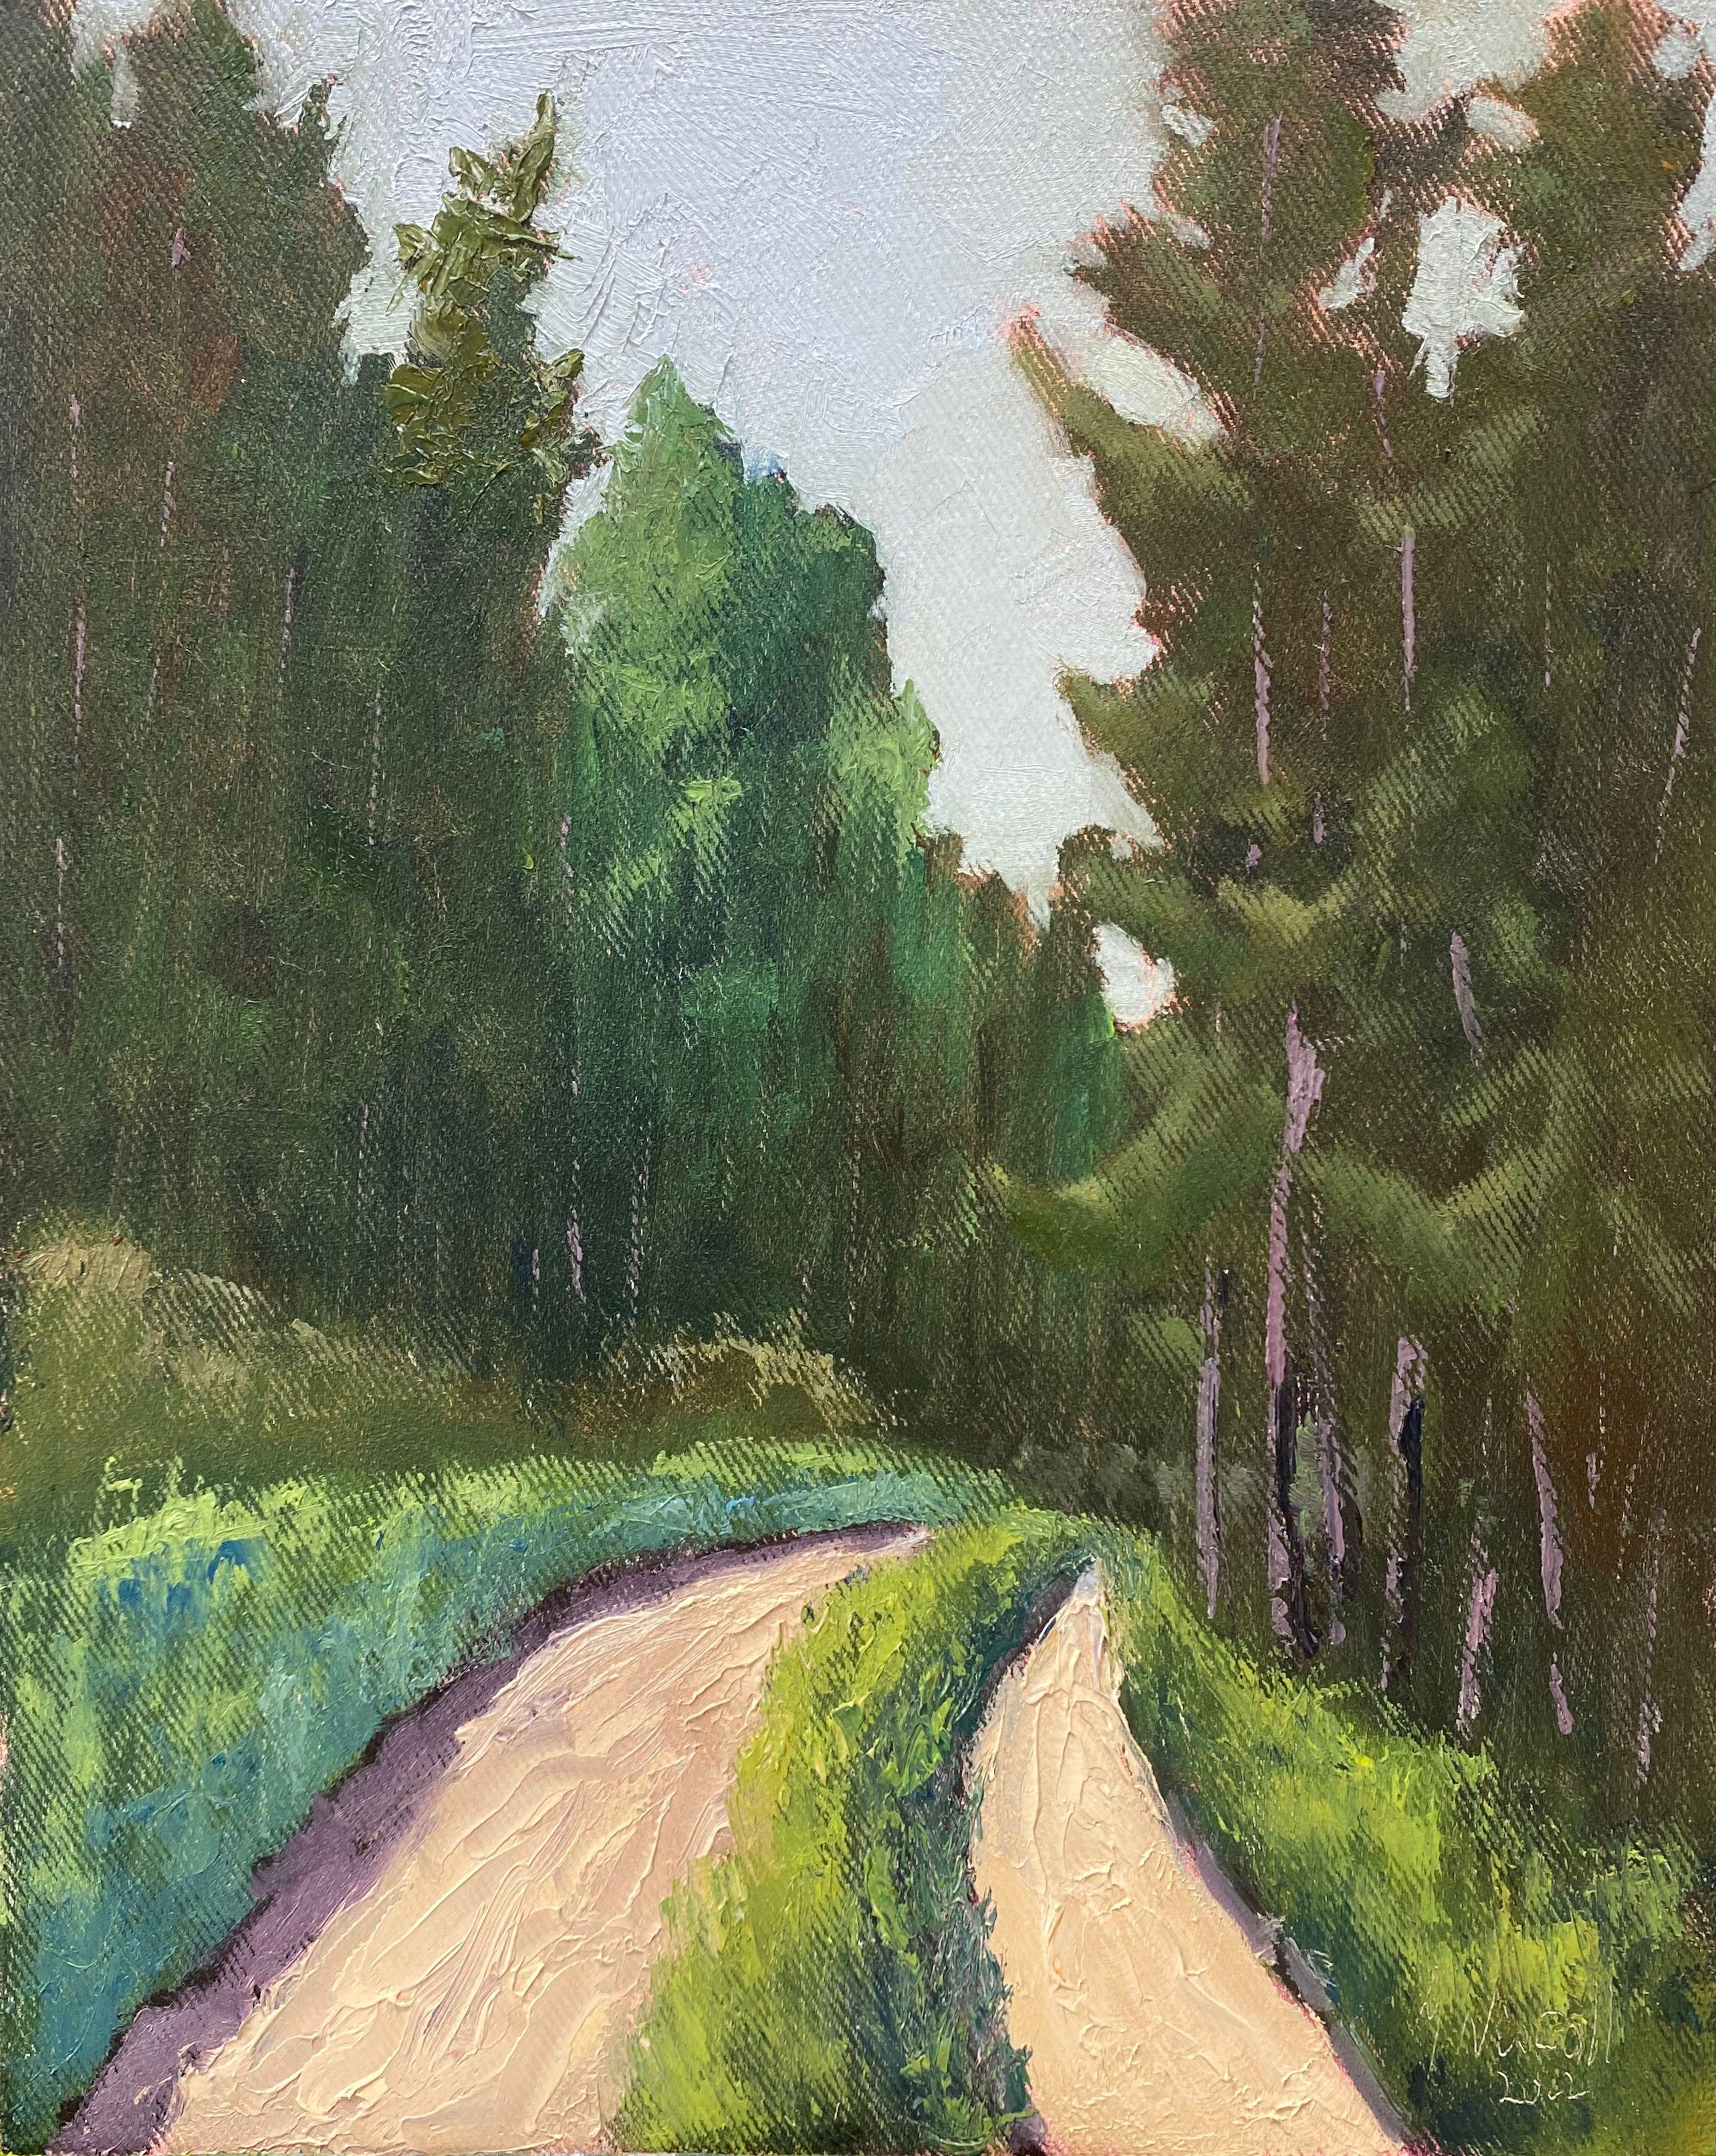 Plein air, Poland, 2022.  Plein air in the forest near Klopotowo. The whole thing exuded such a calmness, I felt at home and calmed down immediately. Perhaps warring factions should take a walk in the woods together, it will definitely lead to